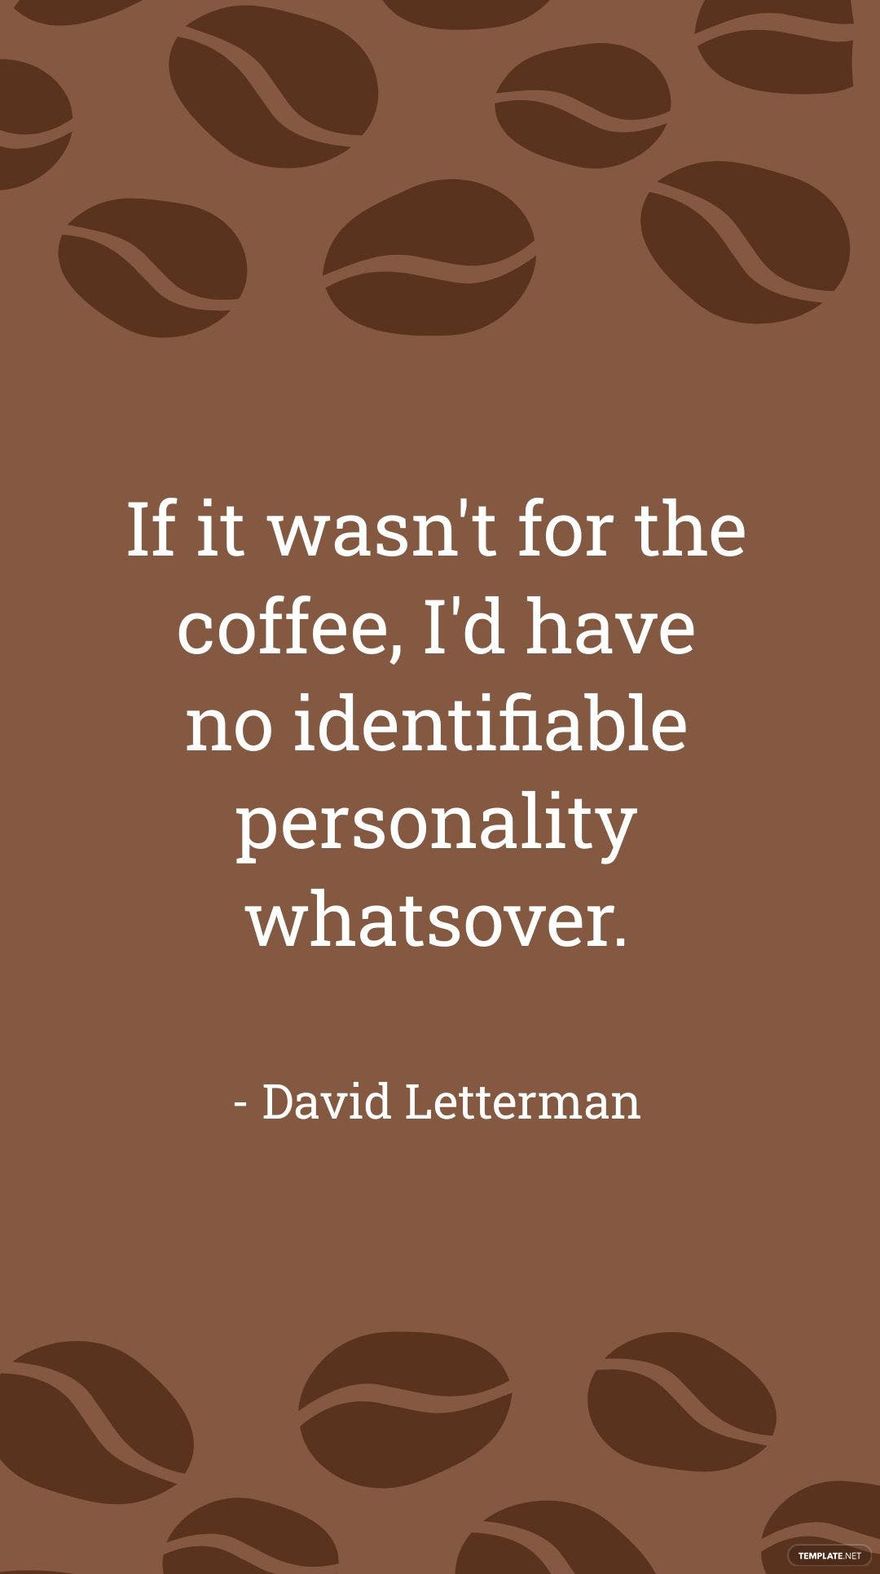 Free David Letterman - If it wasn't for the coffee, I'd have no identifiable personality whatsover. in JPG